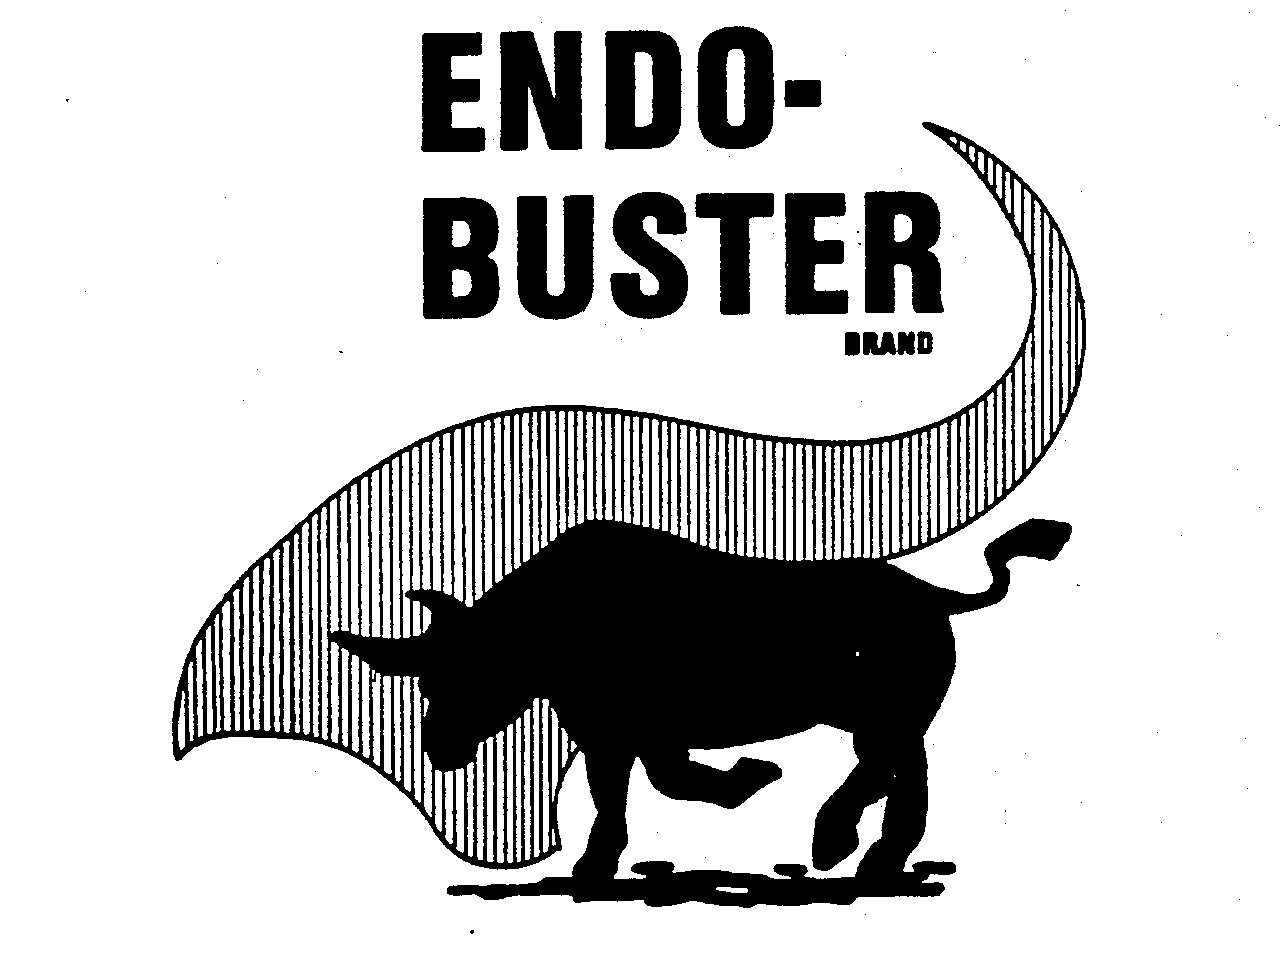  ENDO-BUSTER BRAND